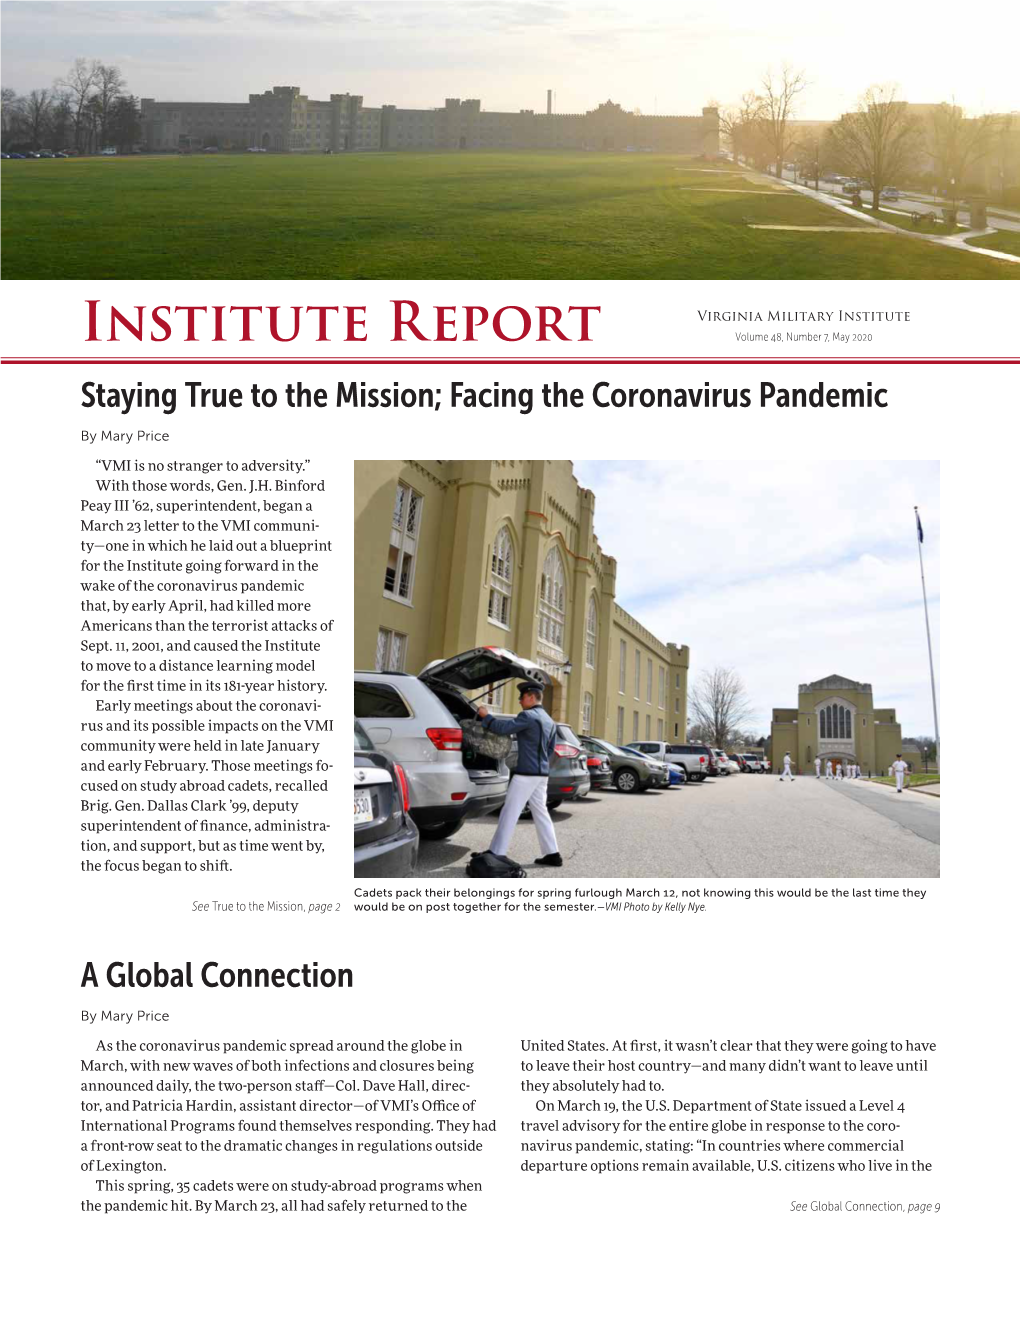 Institute Report Volume 48, Number 7, May 2020 Staying True to the Mission; Facing the Coronavirus Pandemic